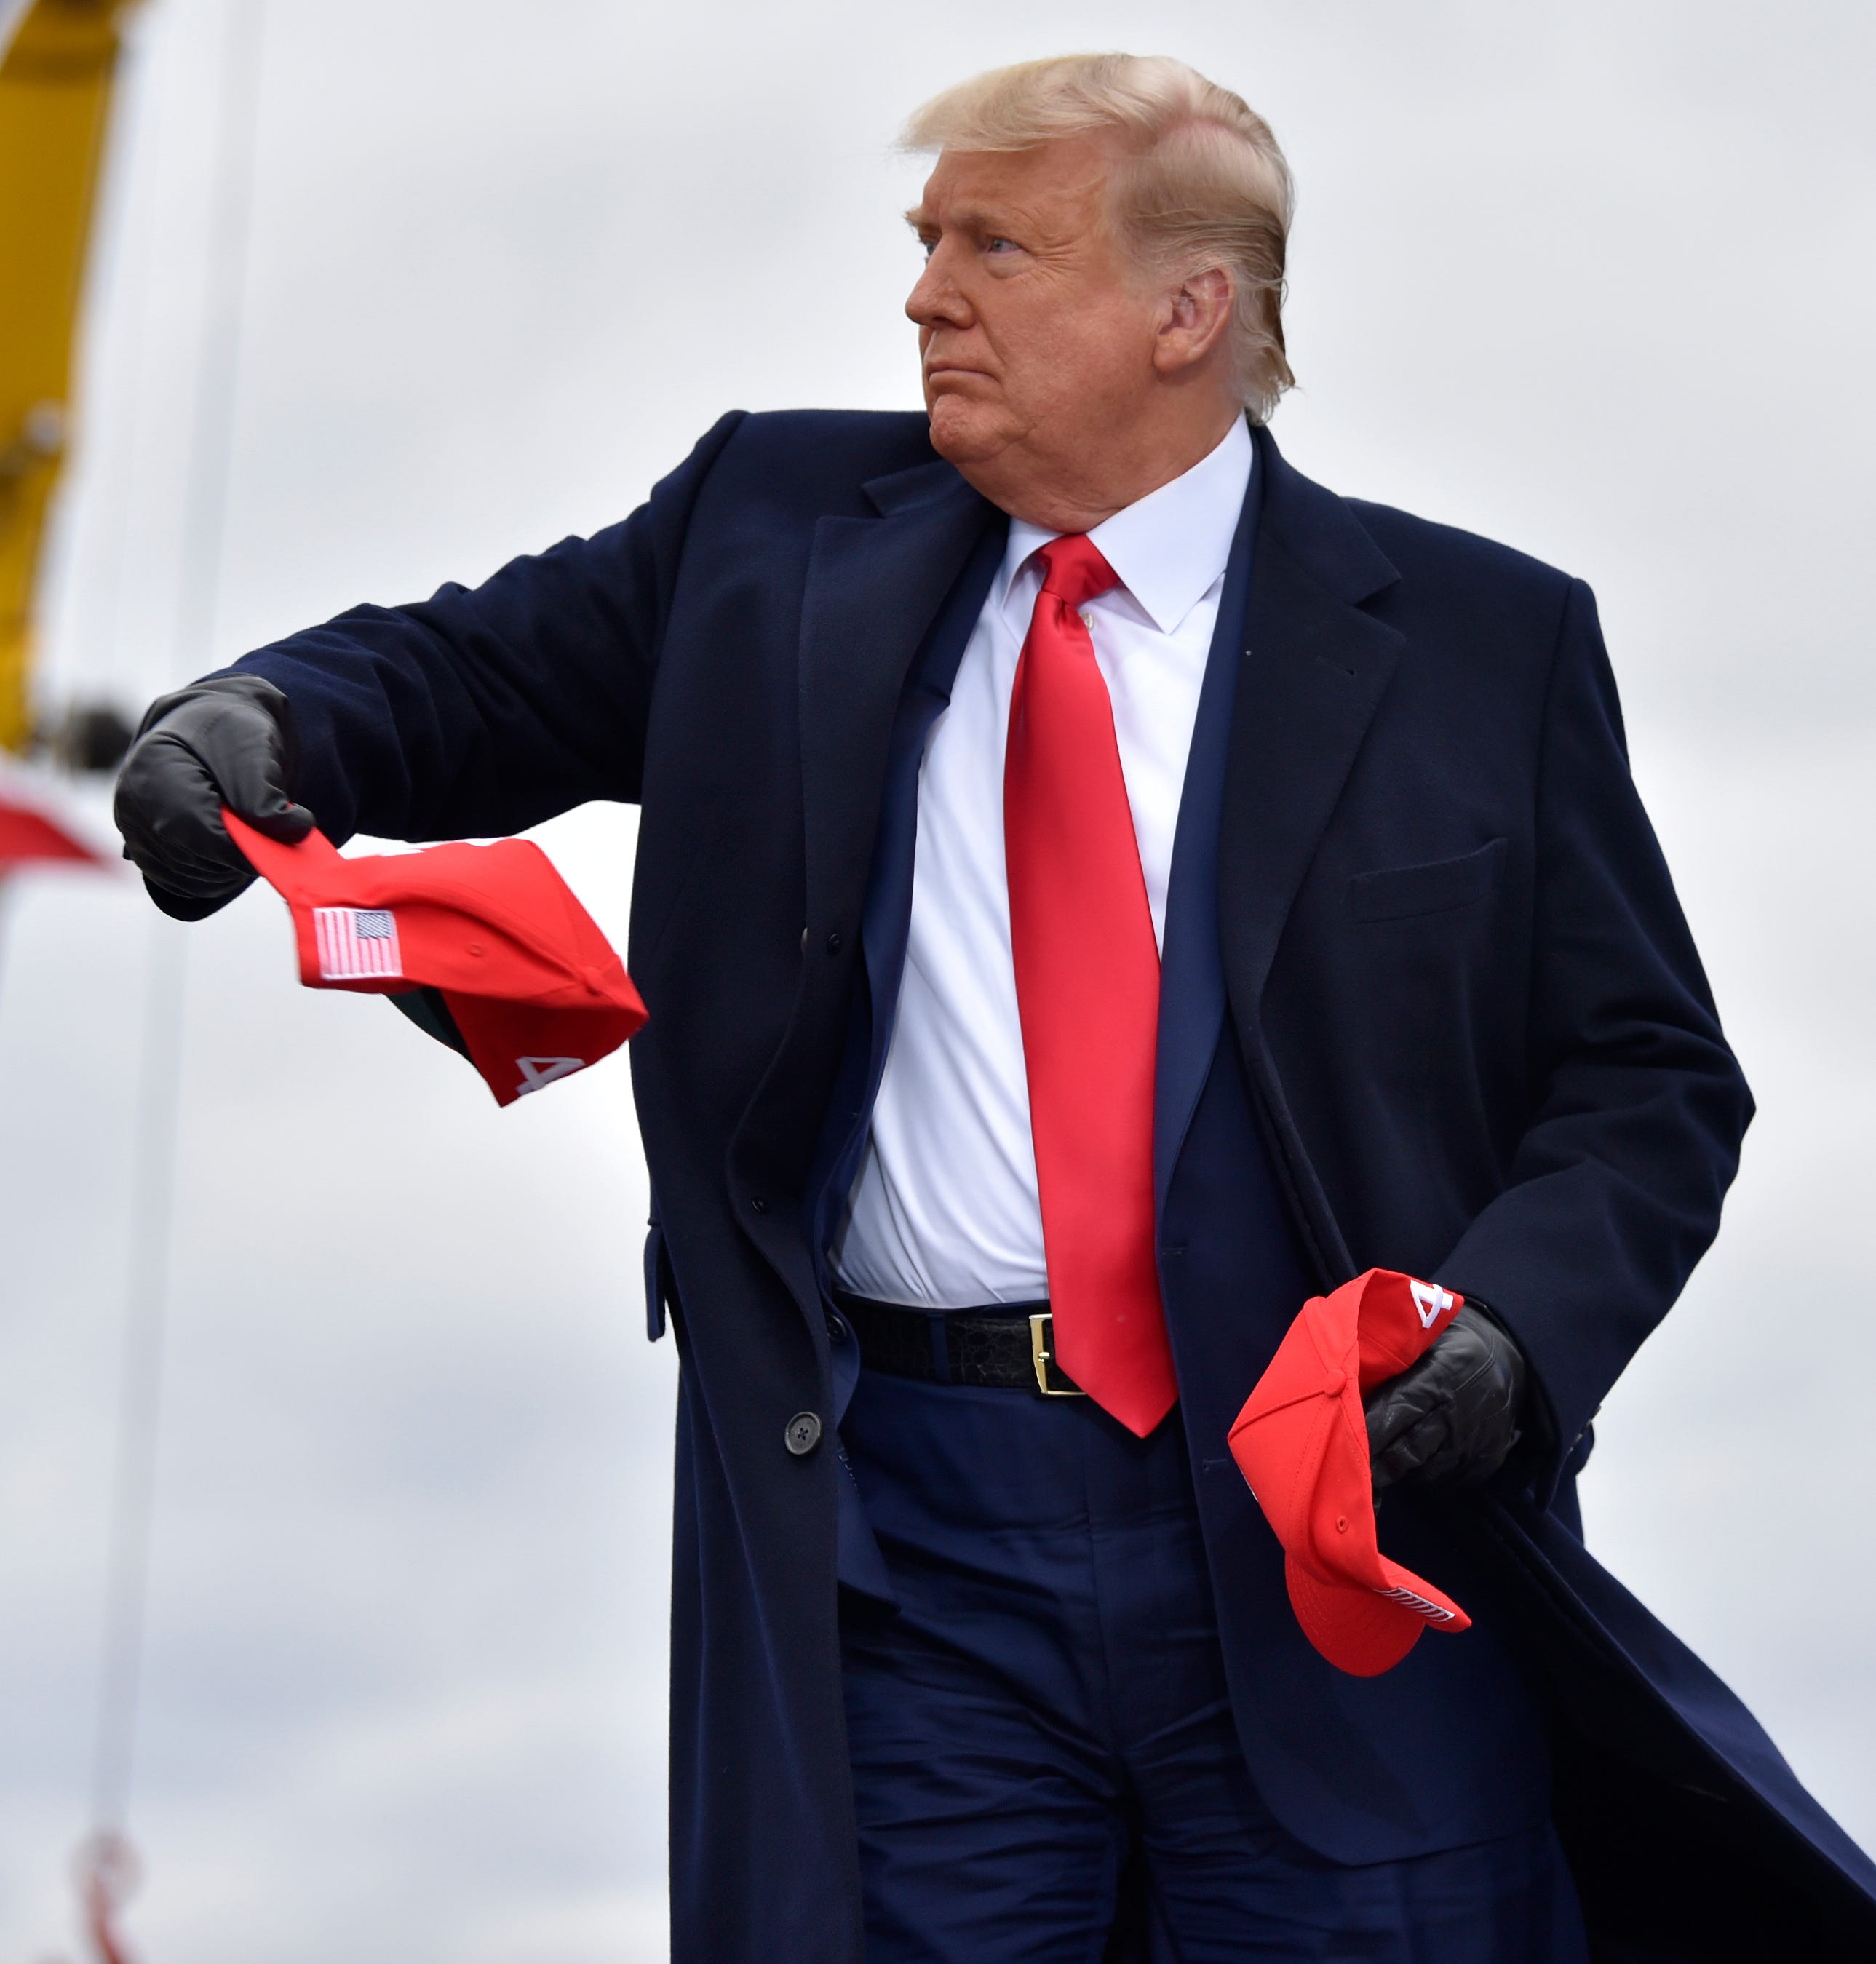 U.S. President Donald Trump throws out hats to the crowd upon his arrival at the Oakland International Airport in Waterford Twp., Friday, October 30, 2020, for his Make America Great Again Victory Rally.